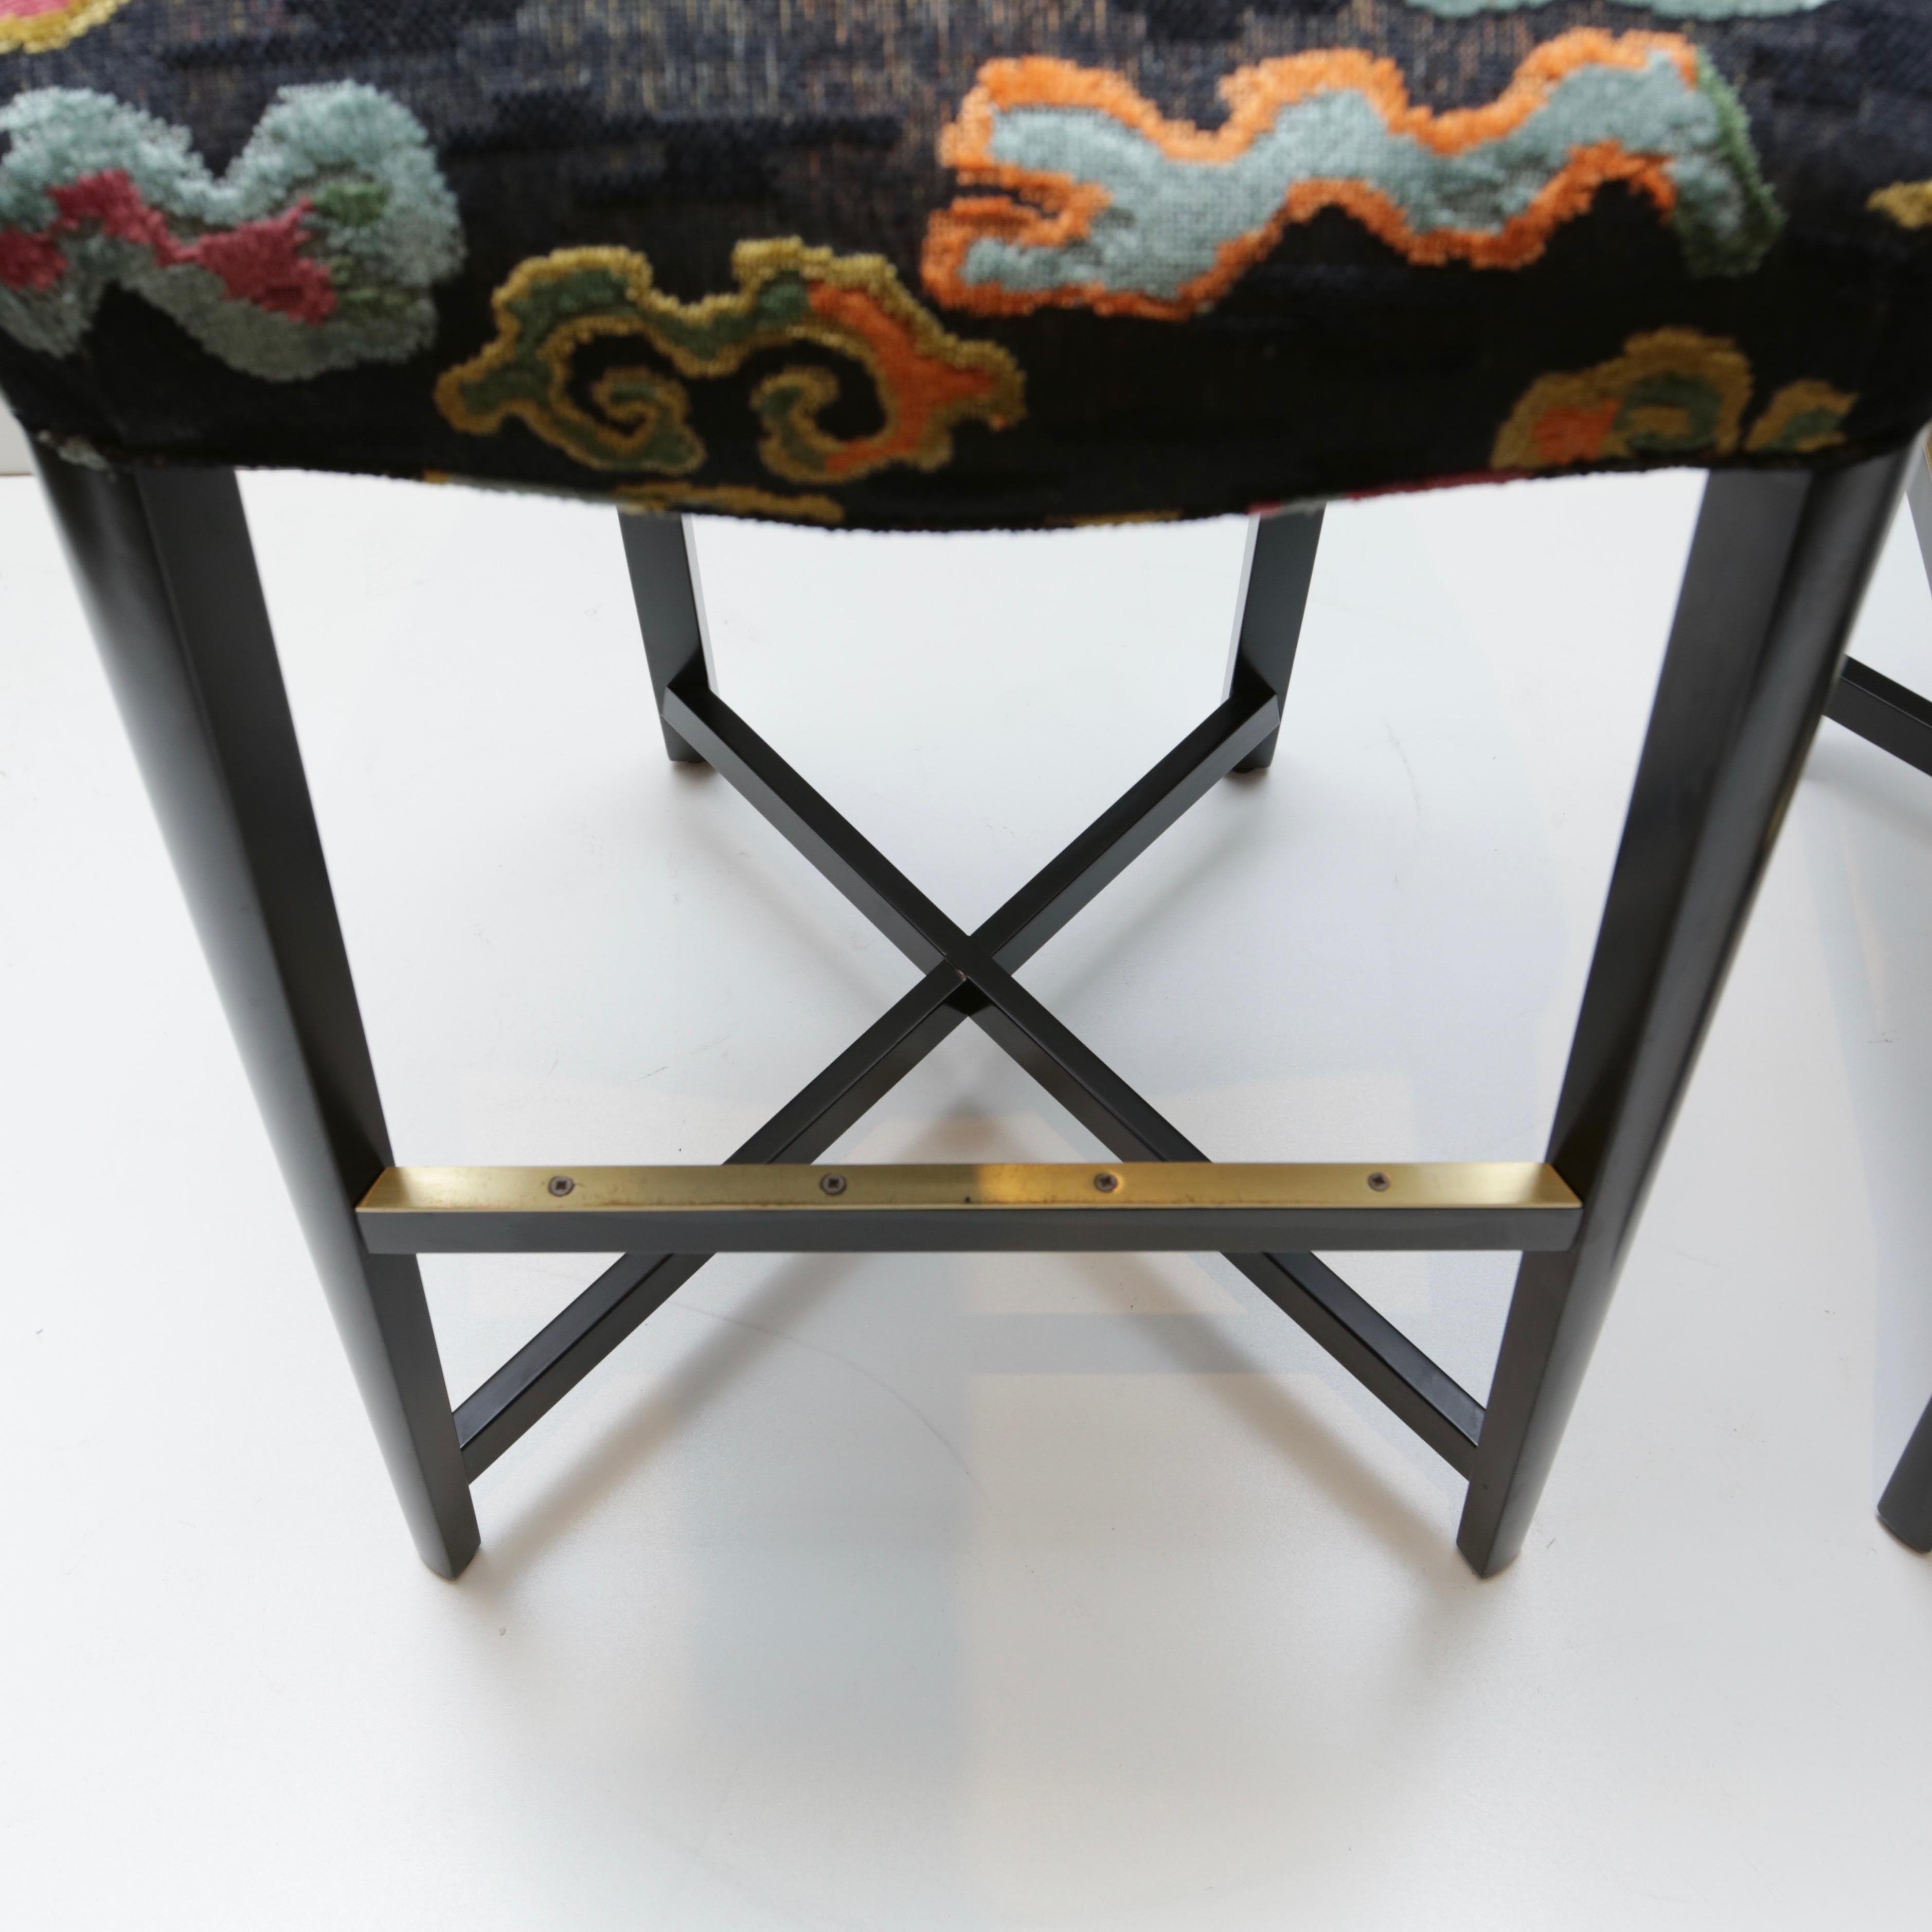 Not your average barstools. This rather striking pair are as standout as Donghia designs are known to be. Ebonized wood frame with brushed brass footrest inserts.